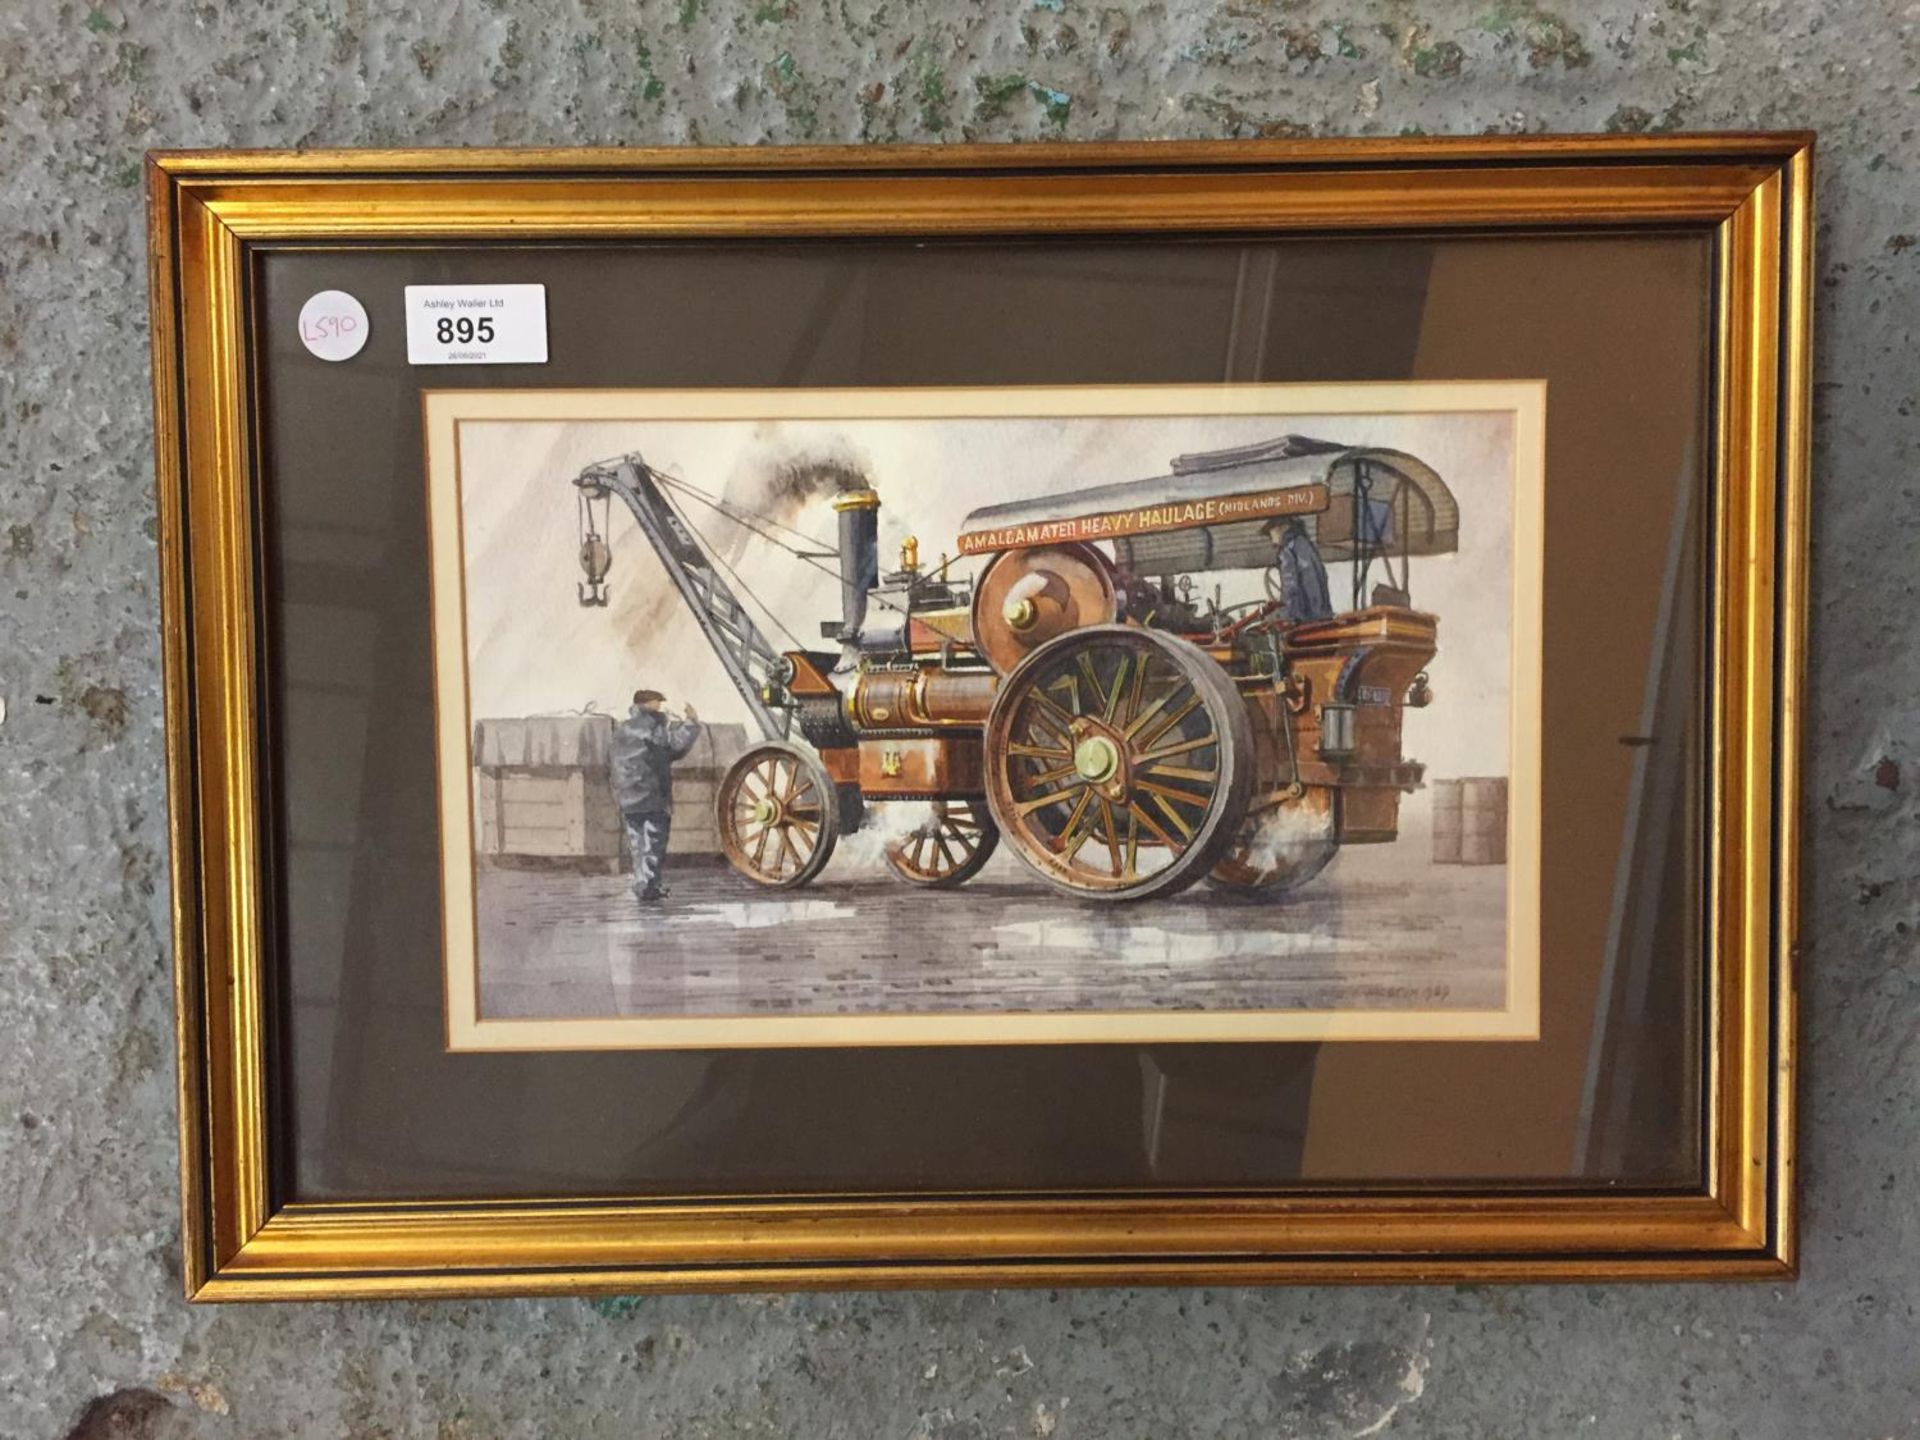 A FRAMED WATERCOLOUR OF 'AMALGAMATED HEAVY HAULAGE MIDLANDS DIV' STEAM ENGINE BY JOHN E. WIGSTON - Image 2 of 2